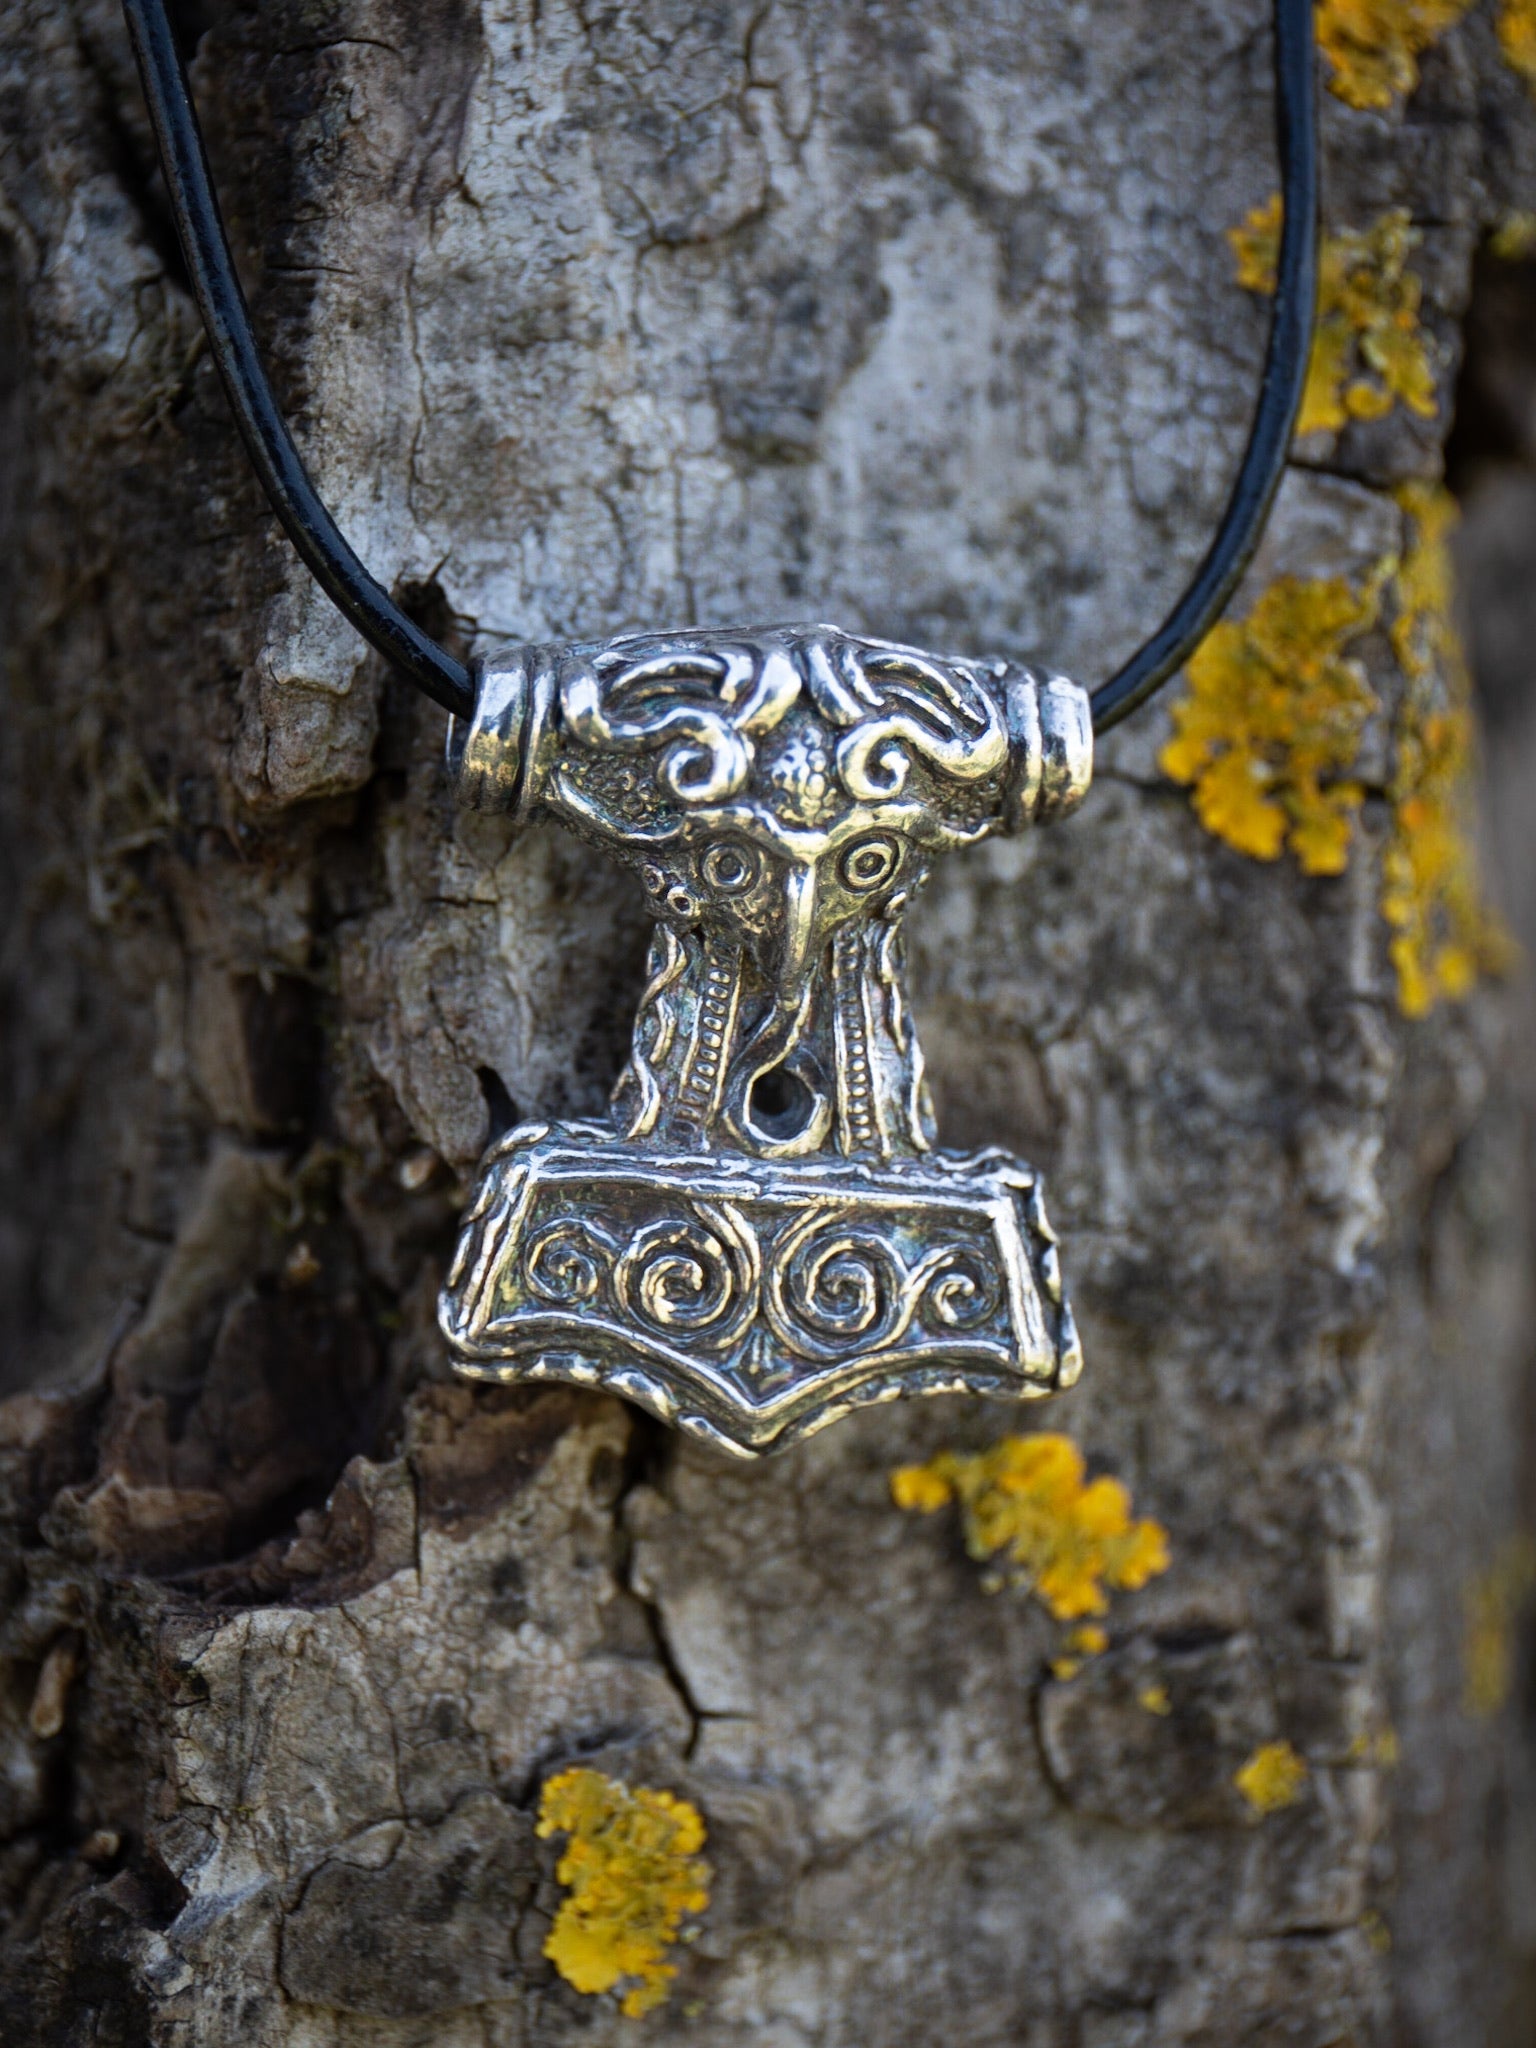 Silver Mjolnir, Descended from Odin, Wanderers Warriors,Organic T-shirts, Staithes Hoodie, Merino Wool Hoodie, Odin, TYR, Thor, Ragnar, Bjorn Ironside, Vikings, Anglo Saxon, Norse, Fitness Gear, Horns, Jewellery, Silver